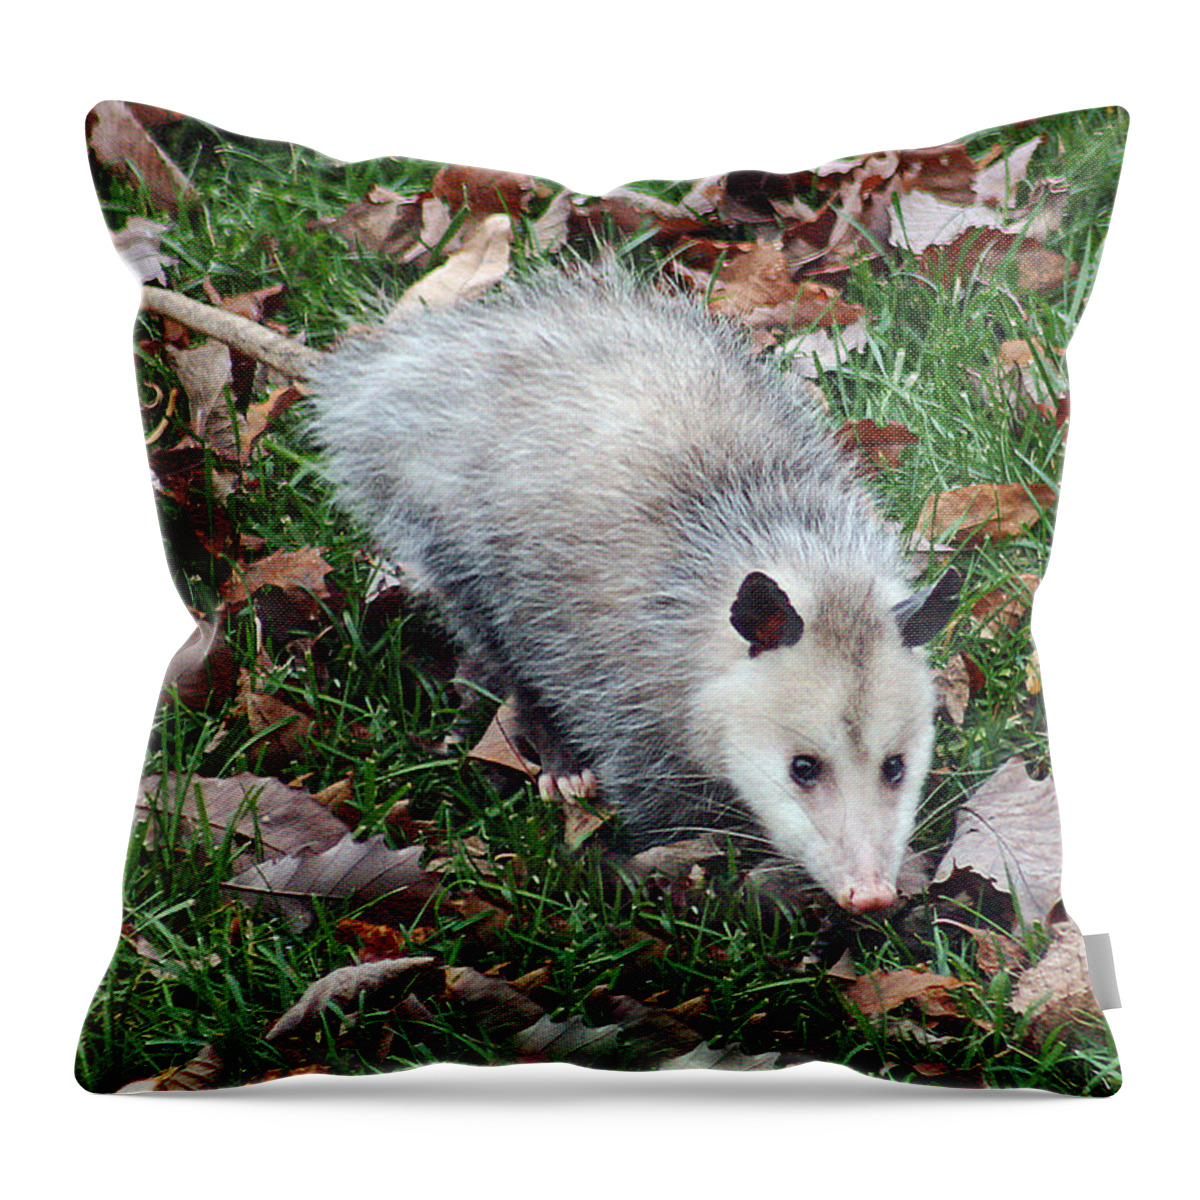 Animal Throw Pillow featuring the photograph Opossum by Gina Fitzhugh